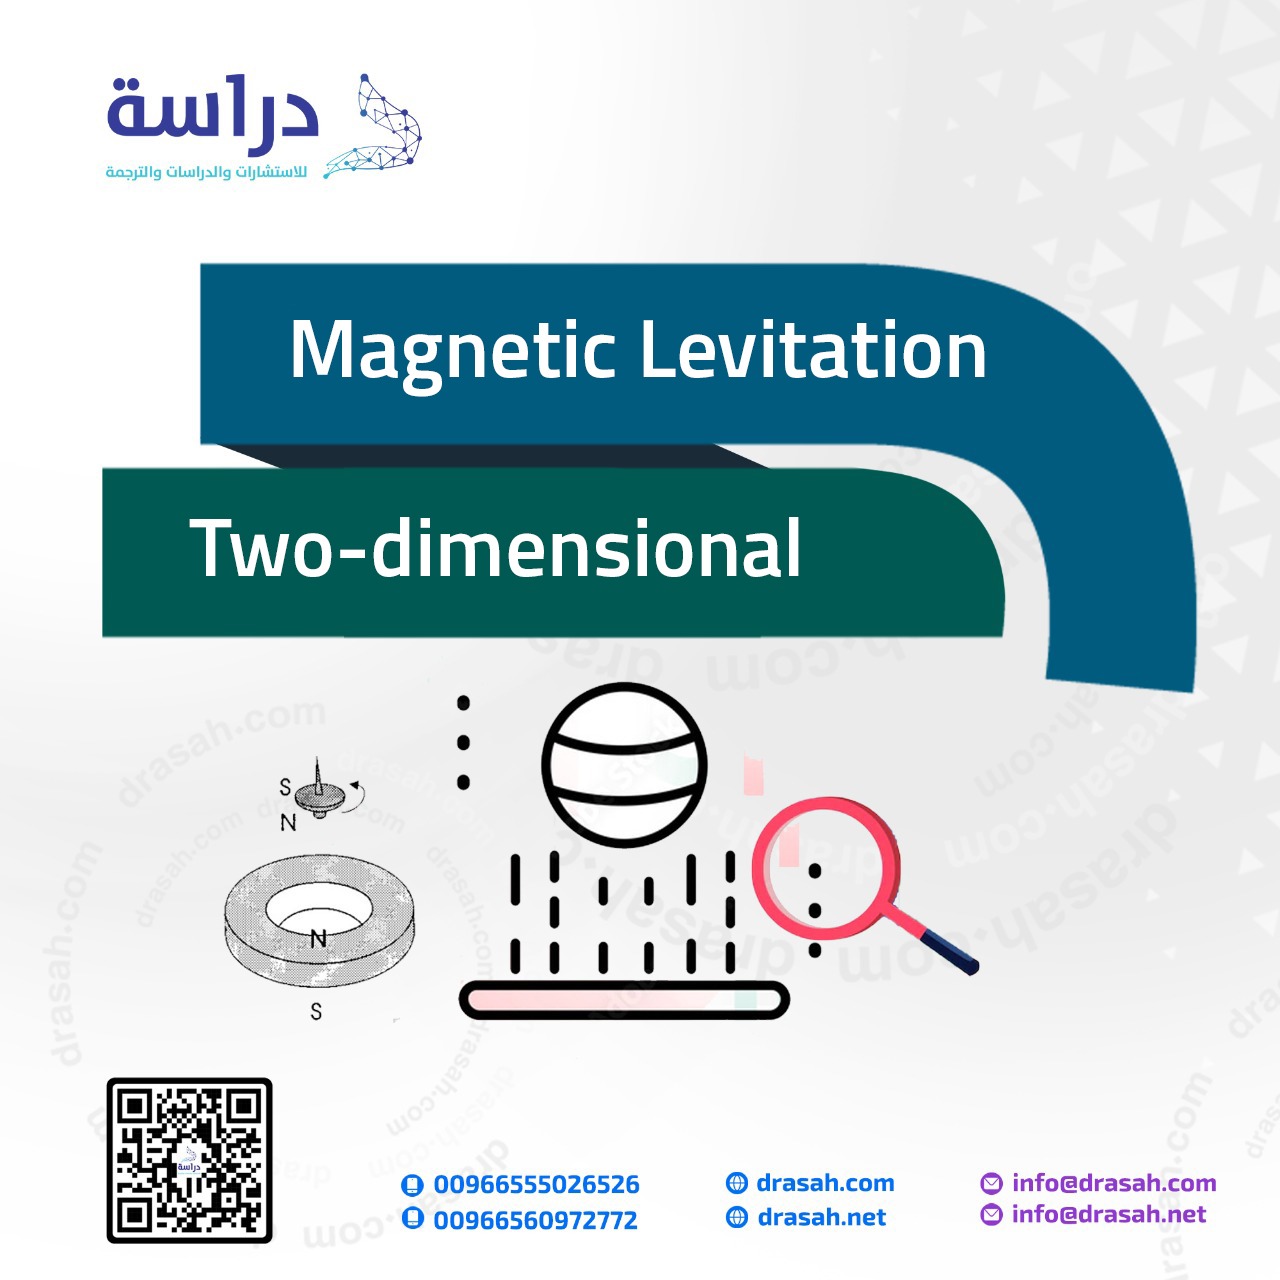 Magnetic Levitation Two-dimensional